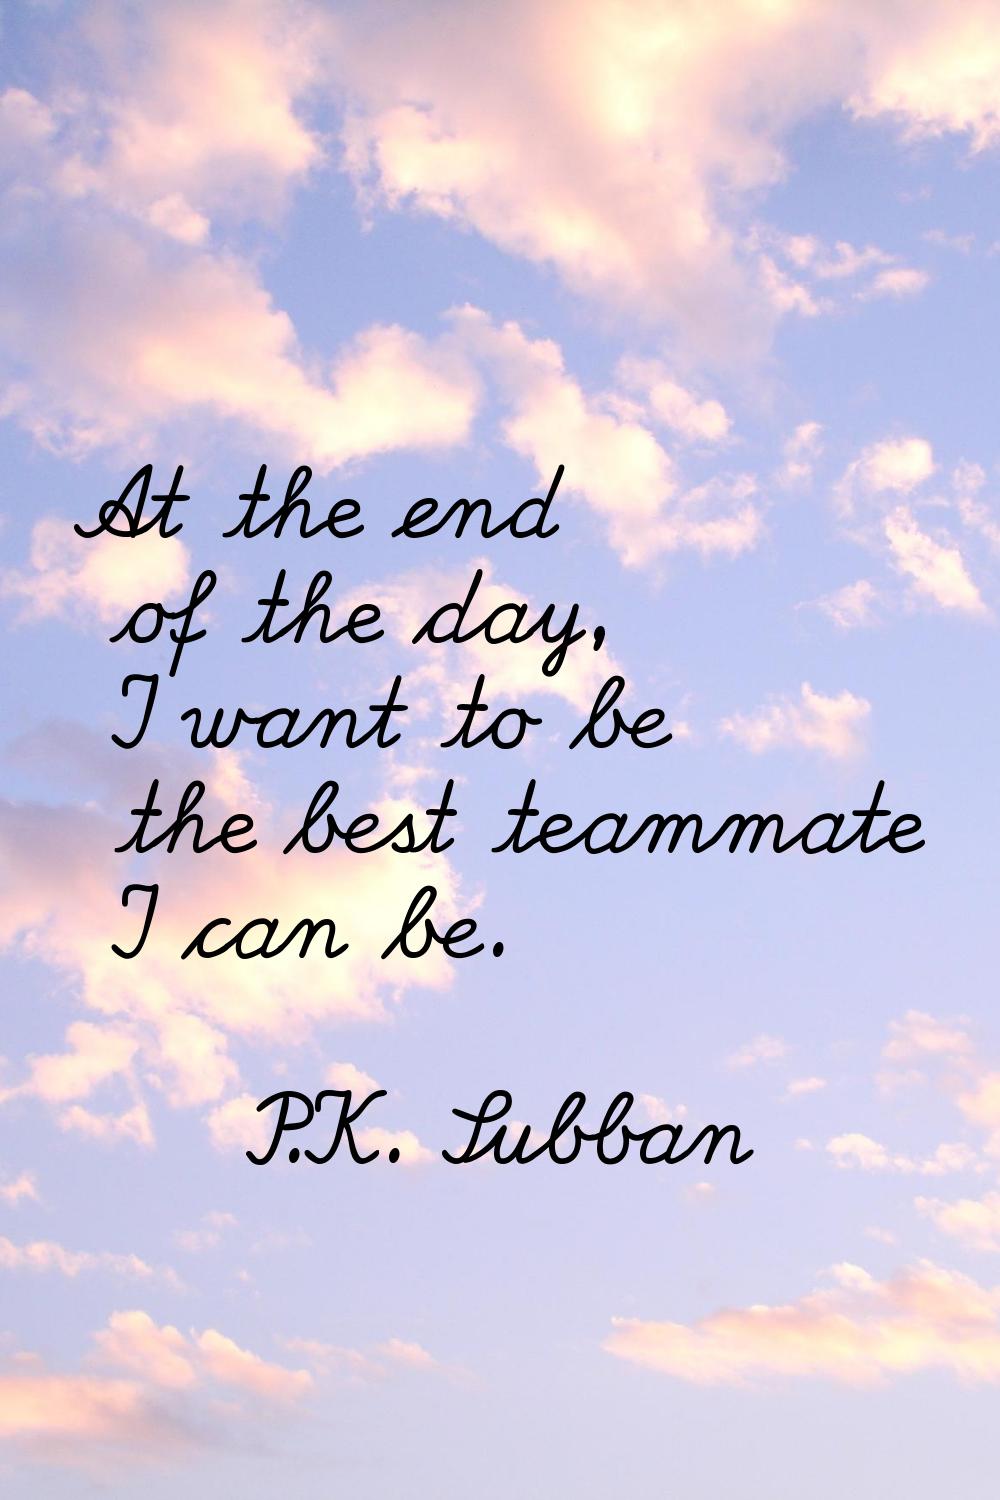 At the end of the day, I want to be the best teammate I can be.